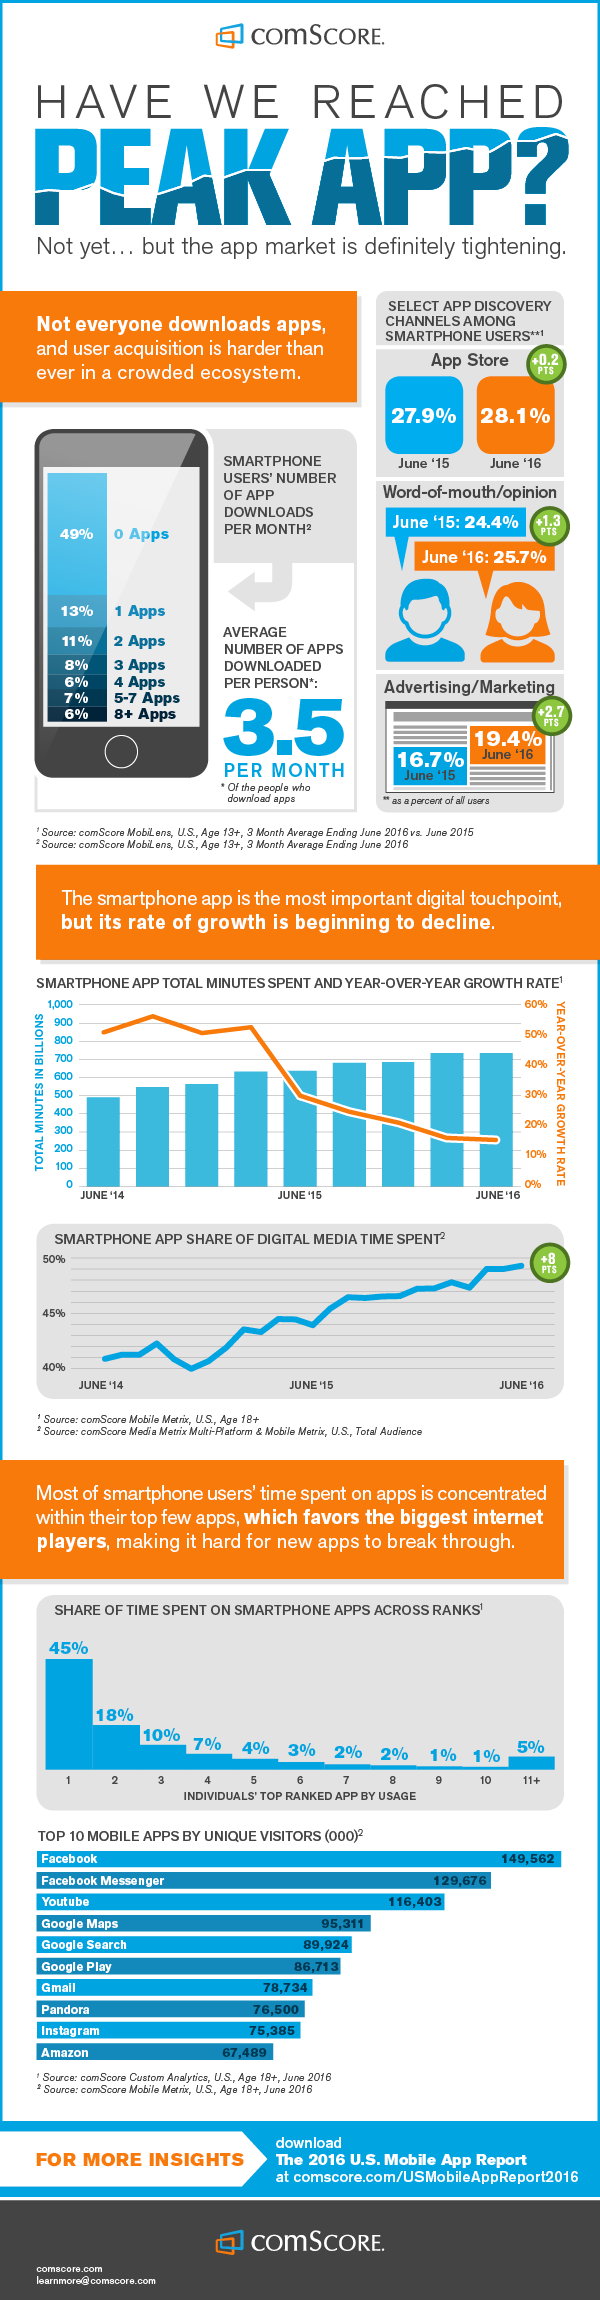 Is the Mobile App Already Dead? comScore Says We’re Nearing “Peak App” (INFOGRAPHIC)